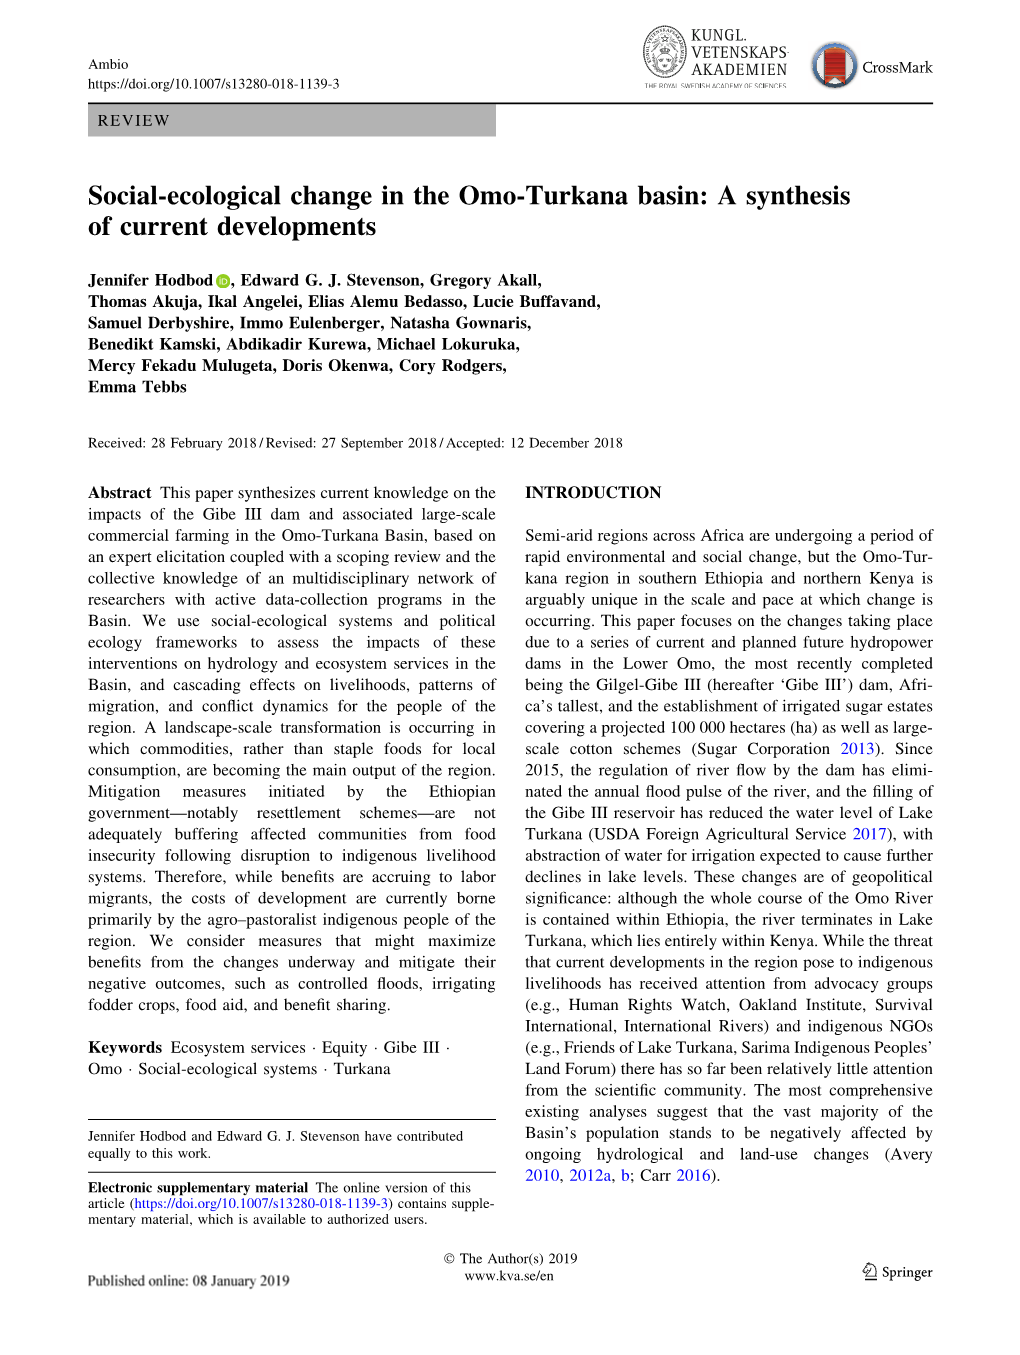 Social-Ecological Change in the Omo-Turkana Basin: a Synthesis of Current Developments